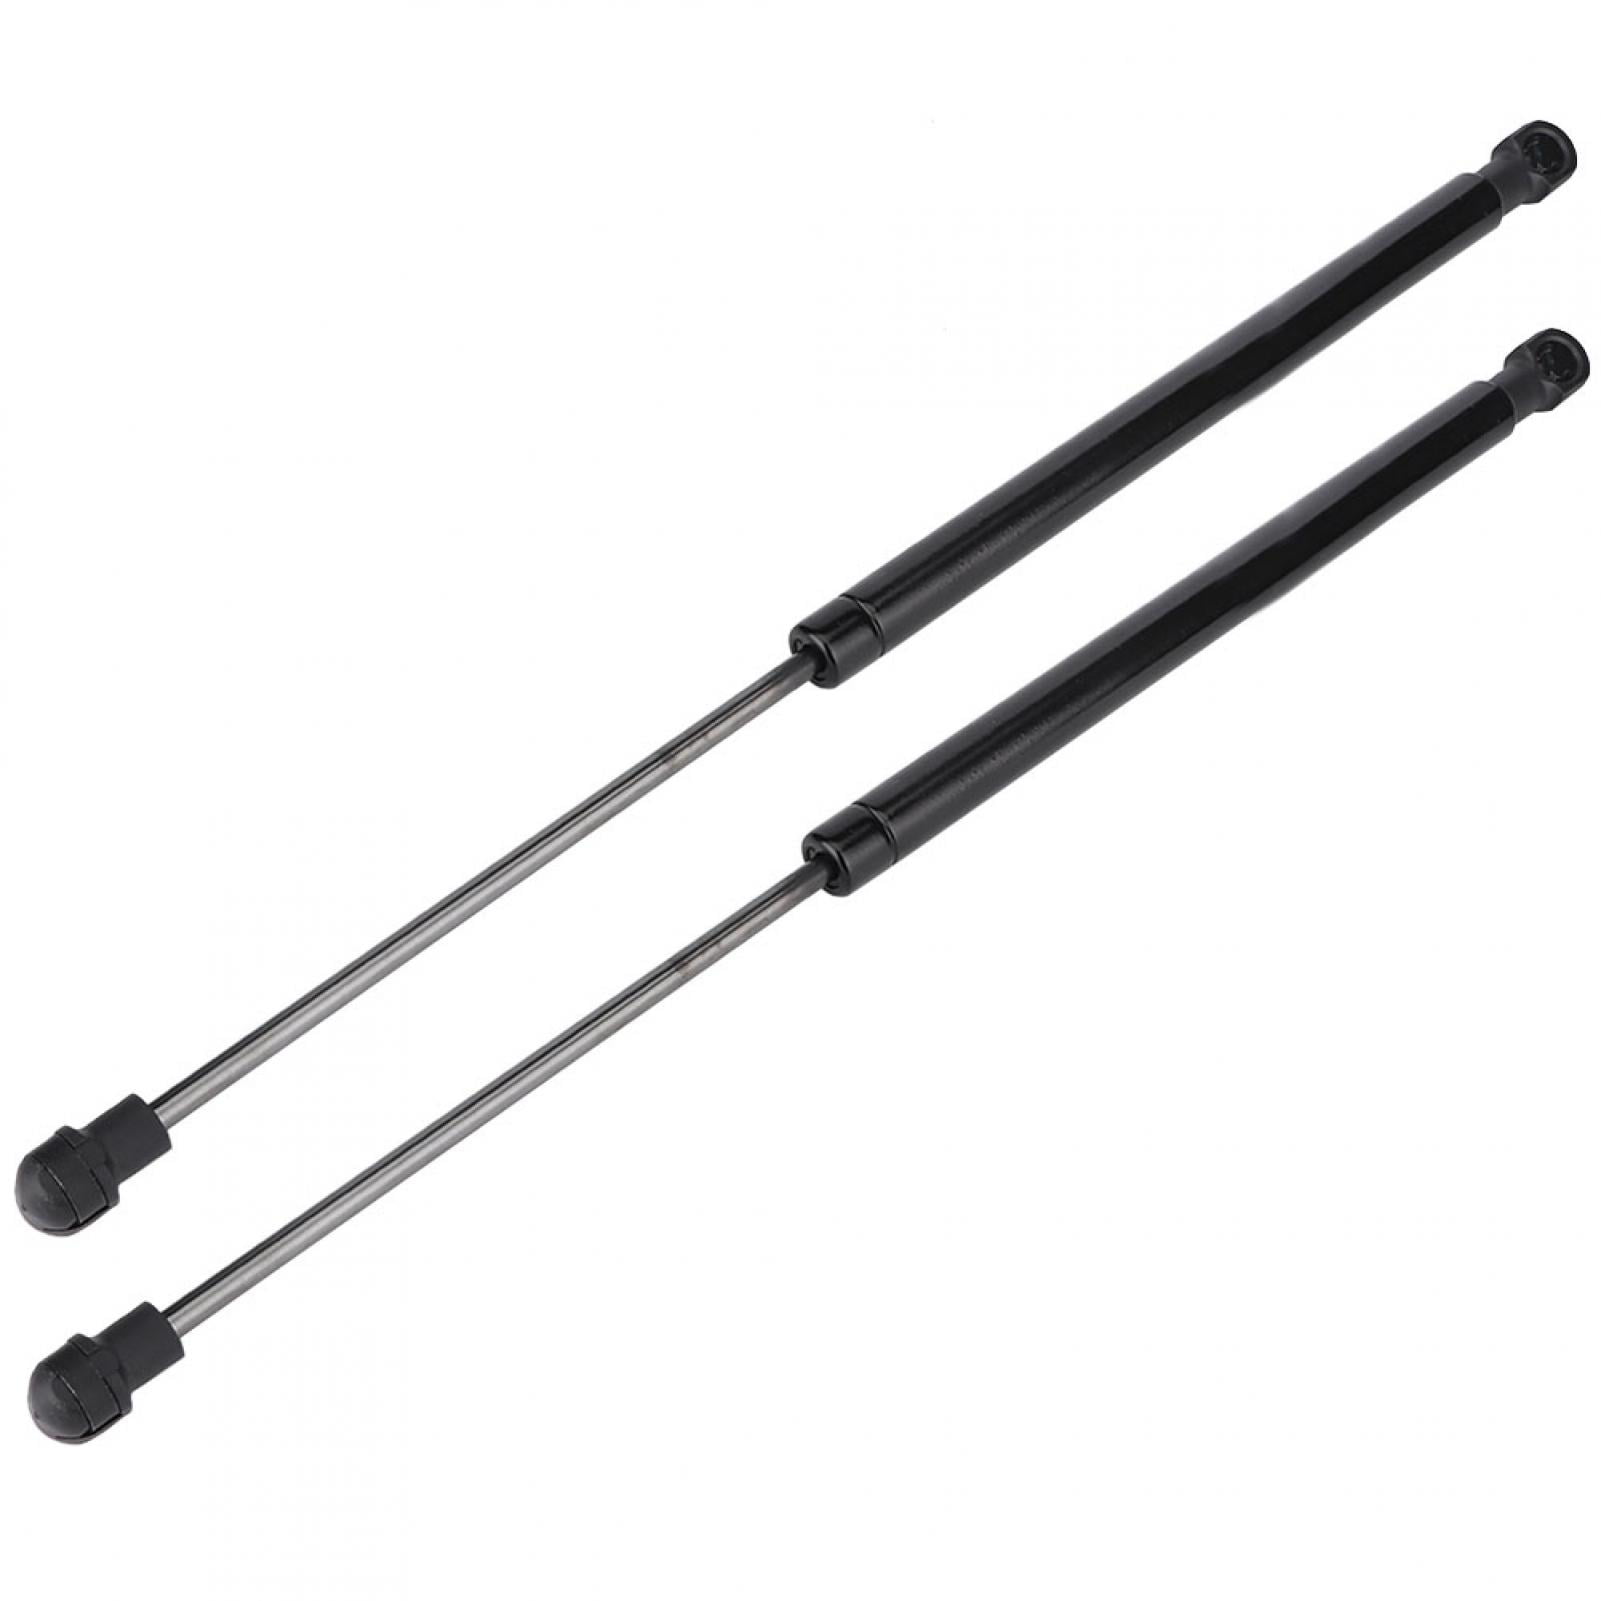 PAIR of bonnet hood gas strut for Land Rover Discovery 3+4 rams lift spring open